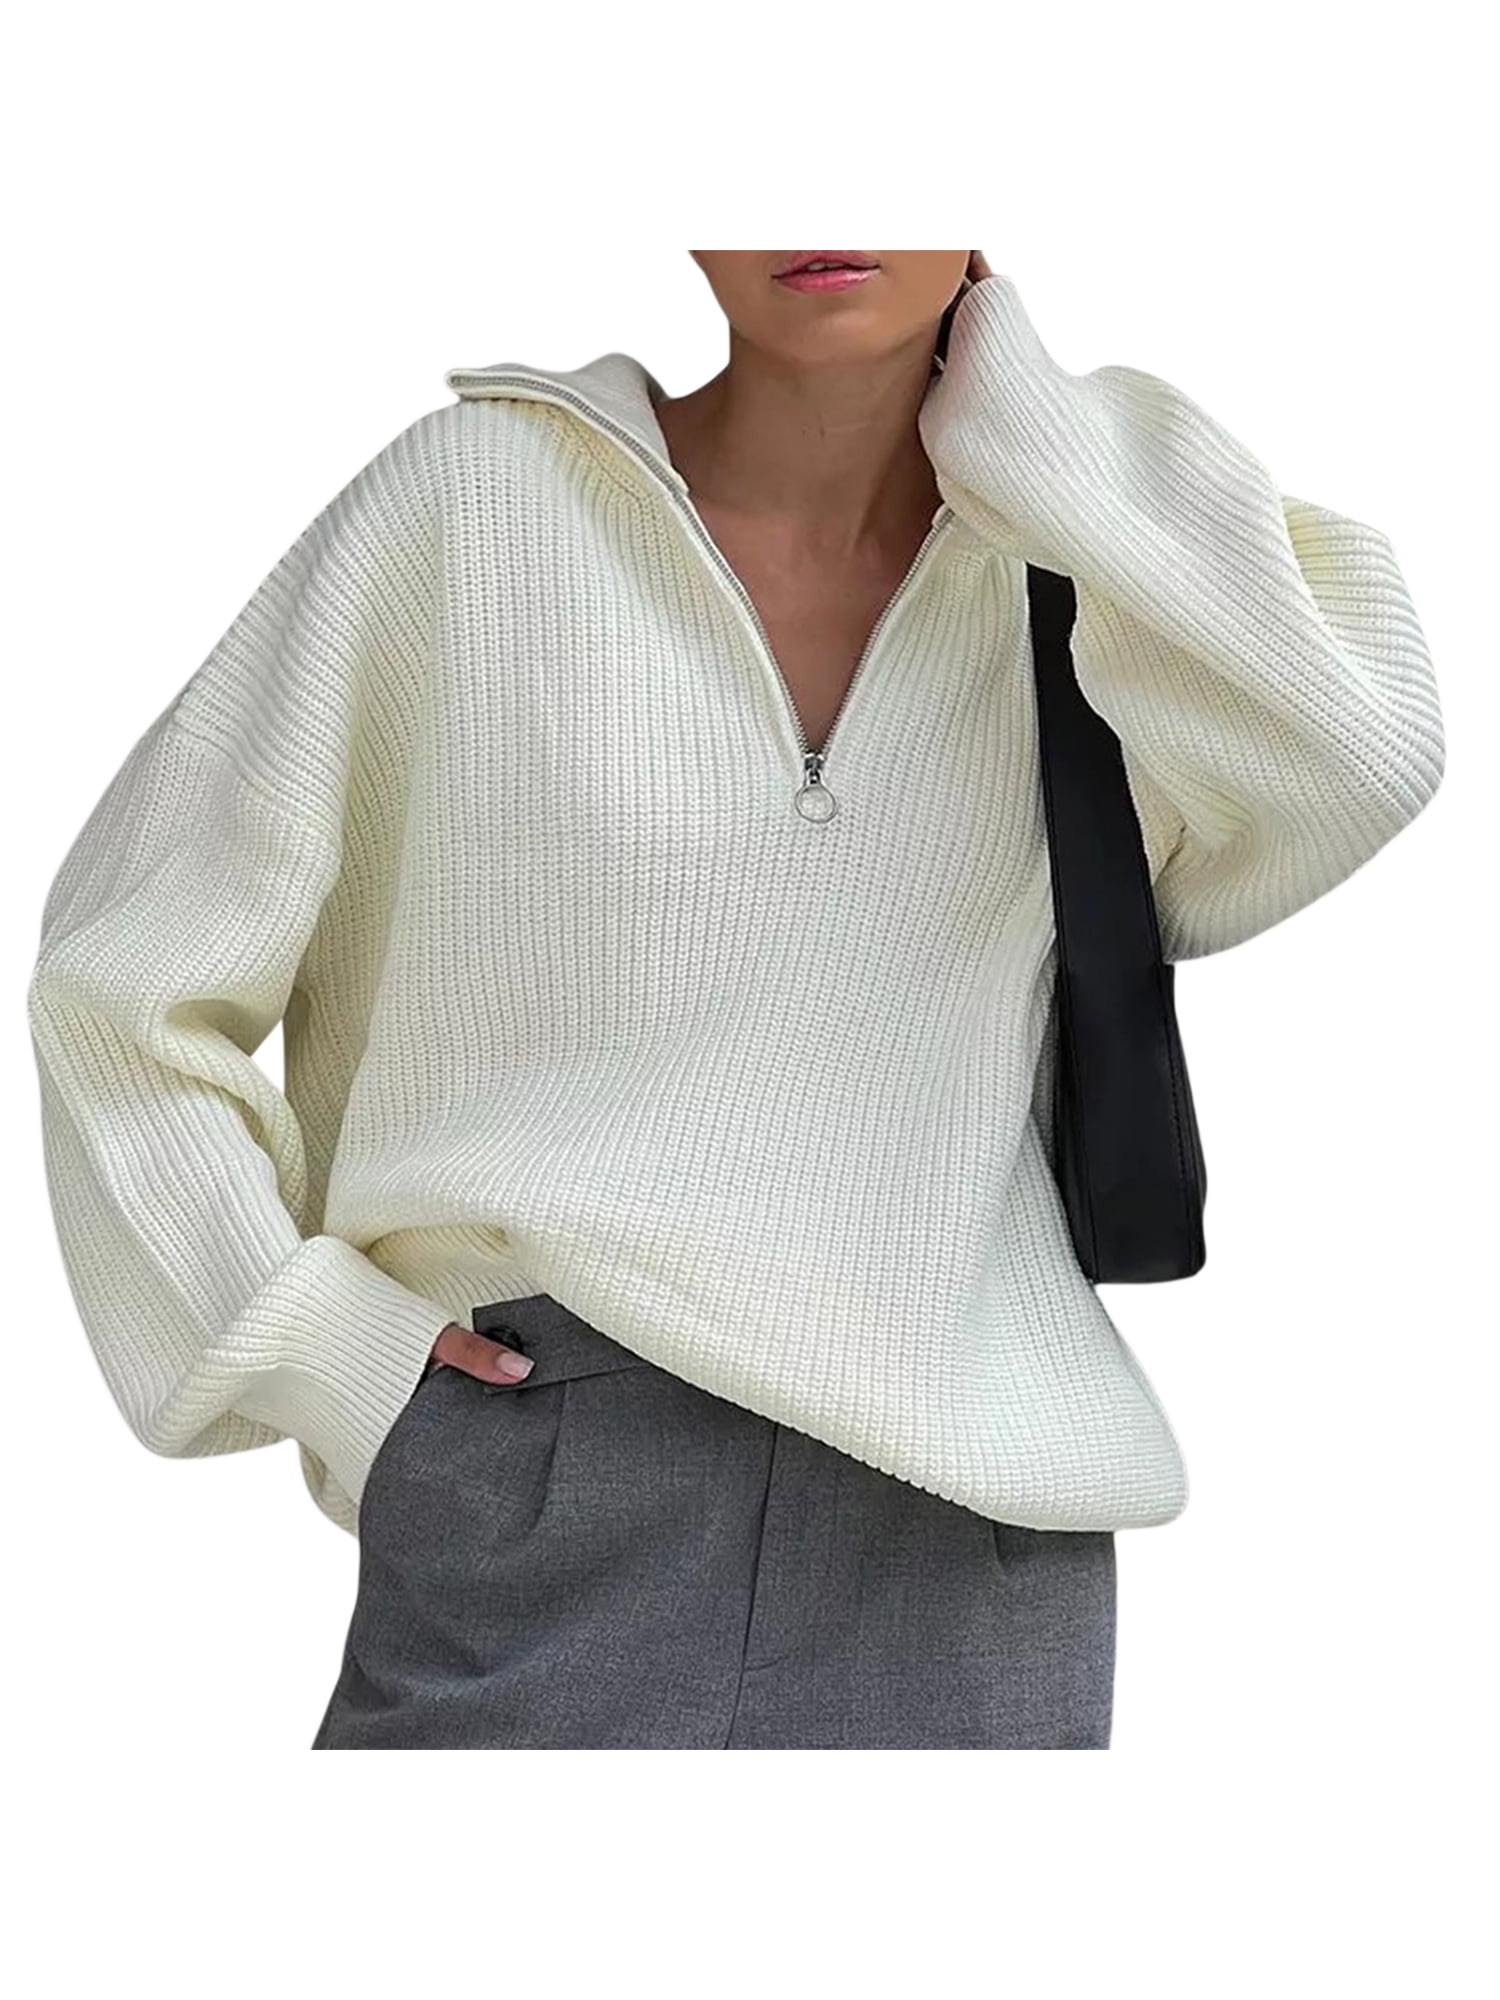 Tops Ribbed Long Knit Sweaters Pullover Women AMILIEe Sleeve Jumper Knitwear V-Neck Collar Lapel